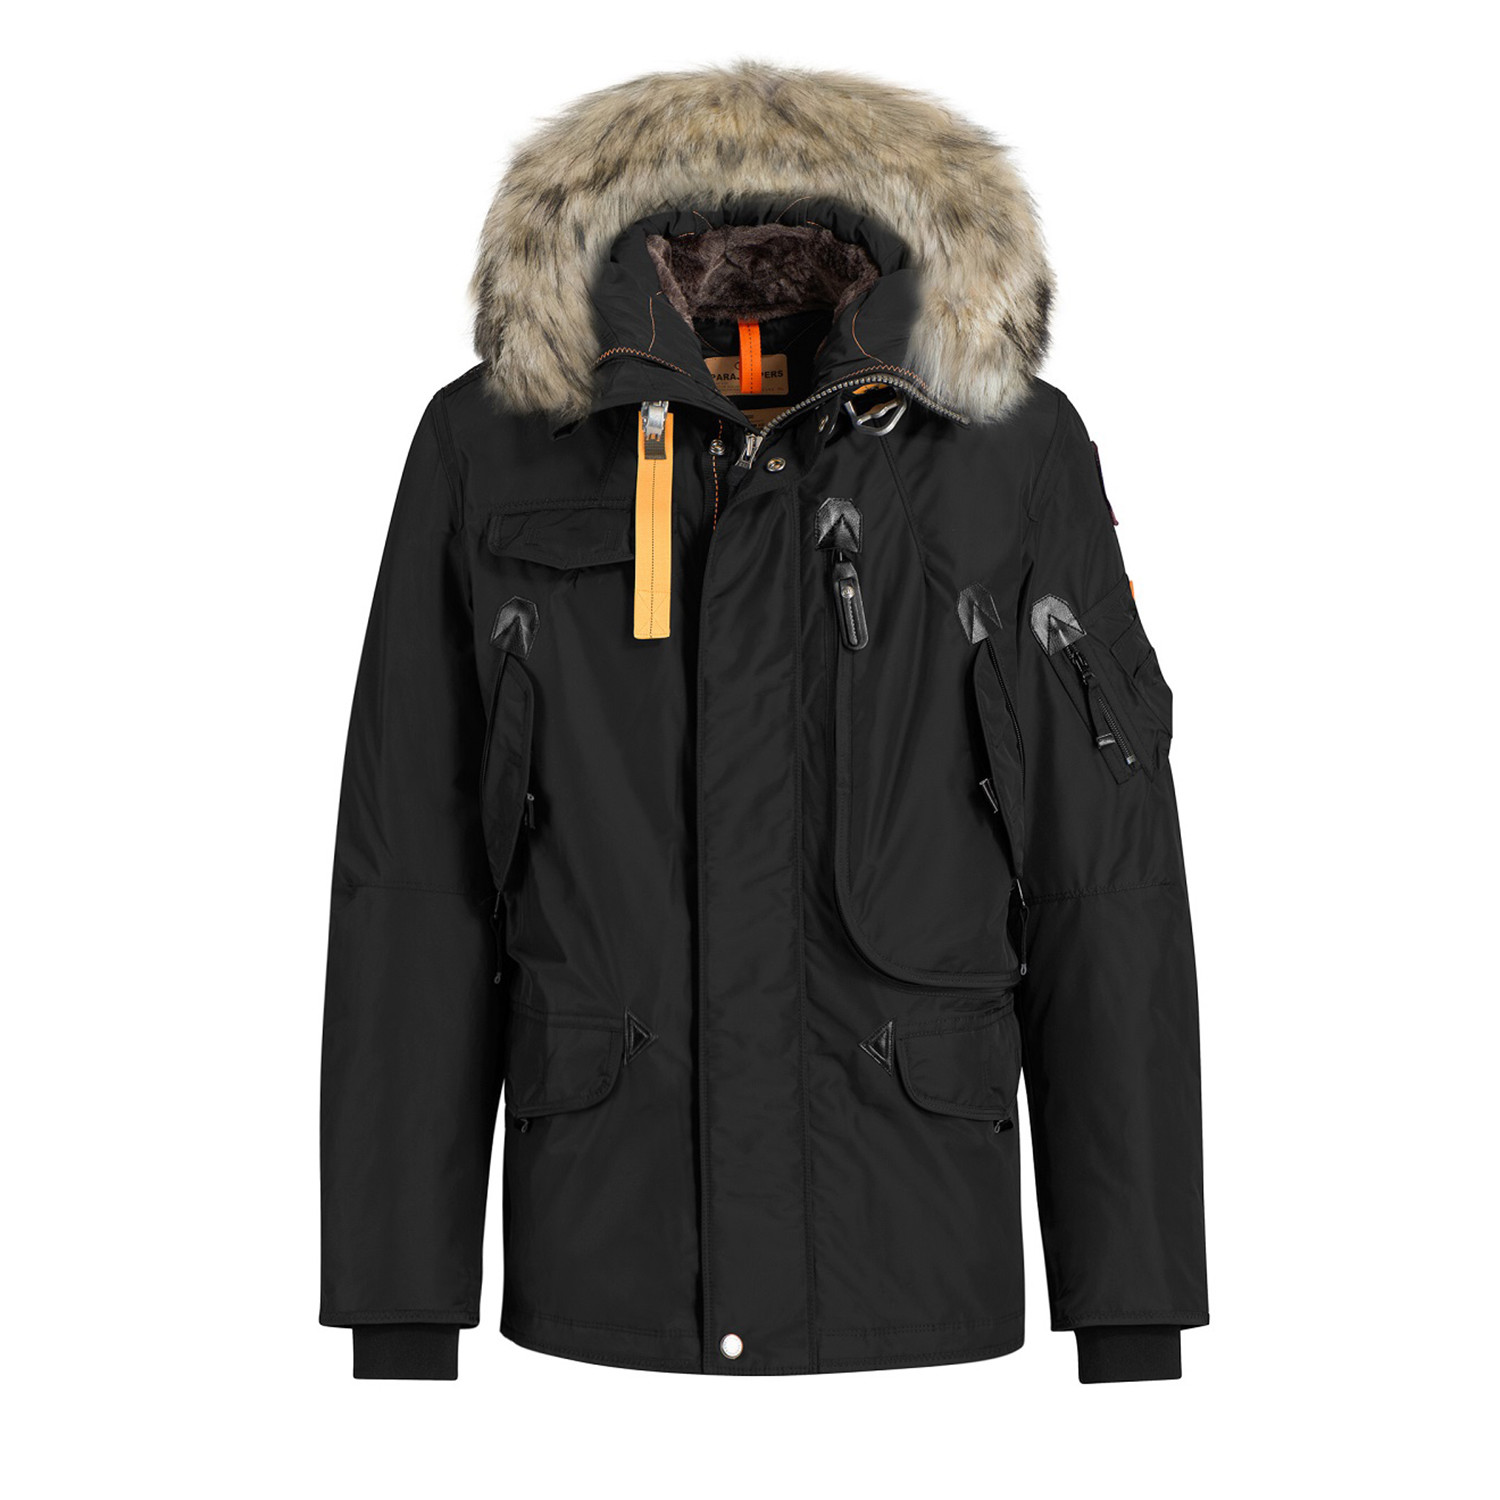 Parajumpers // Men's Right Hand Jacket // Black (S) - Canada Goose ...